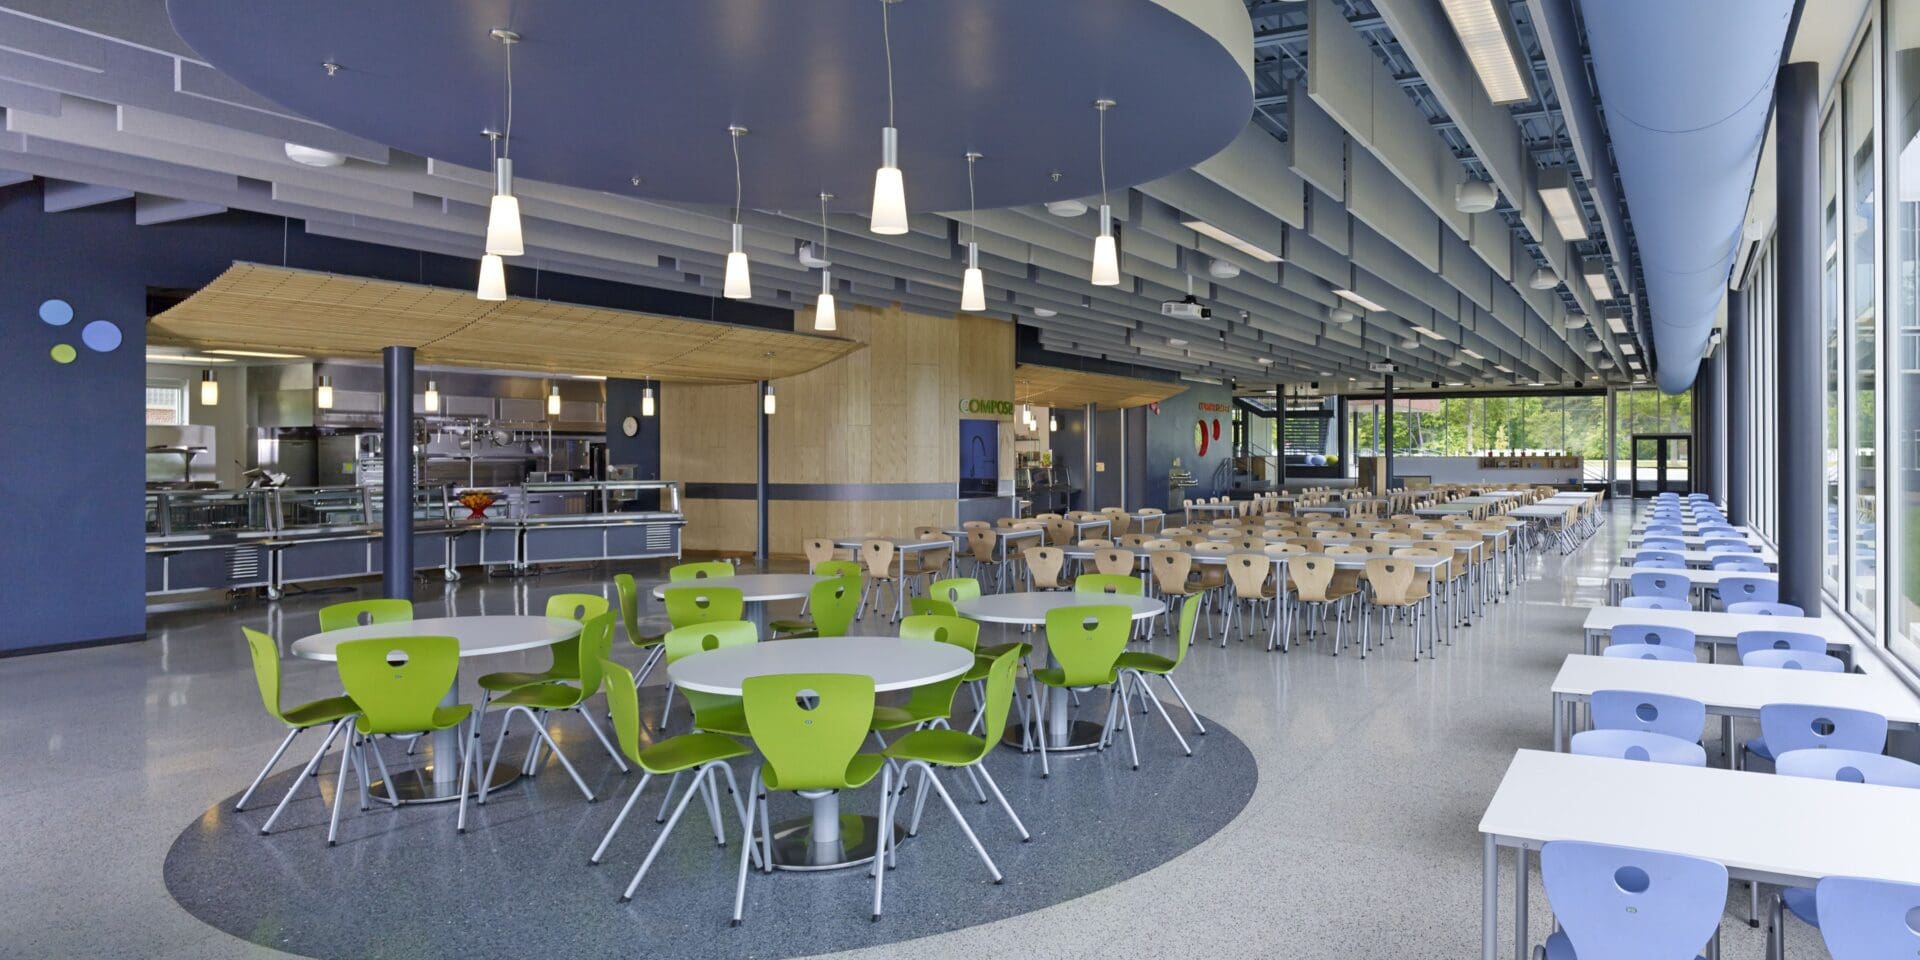 A cafeteria with many tables and chairs in it